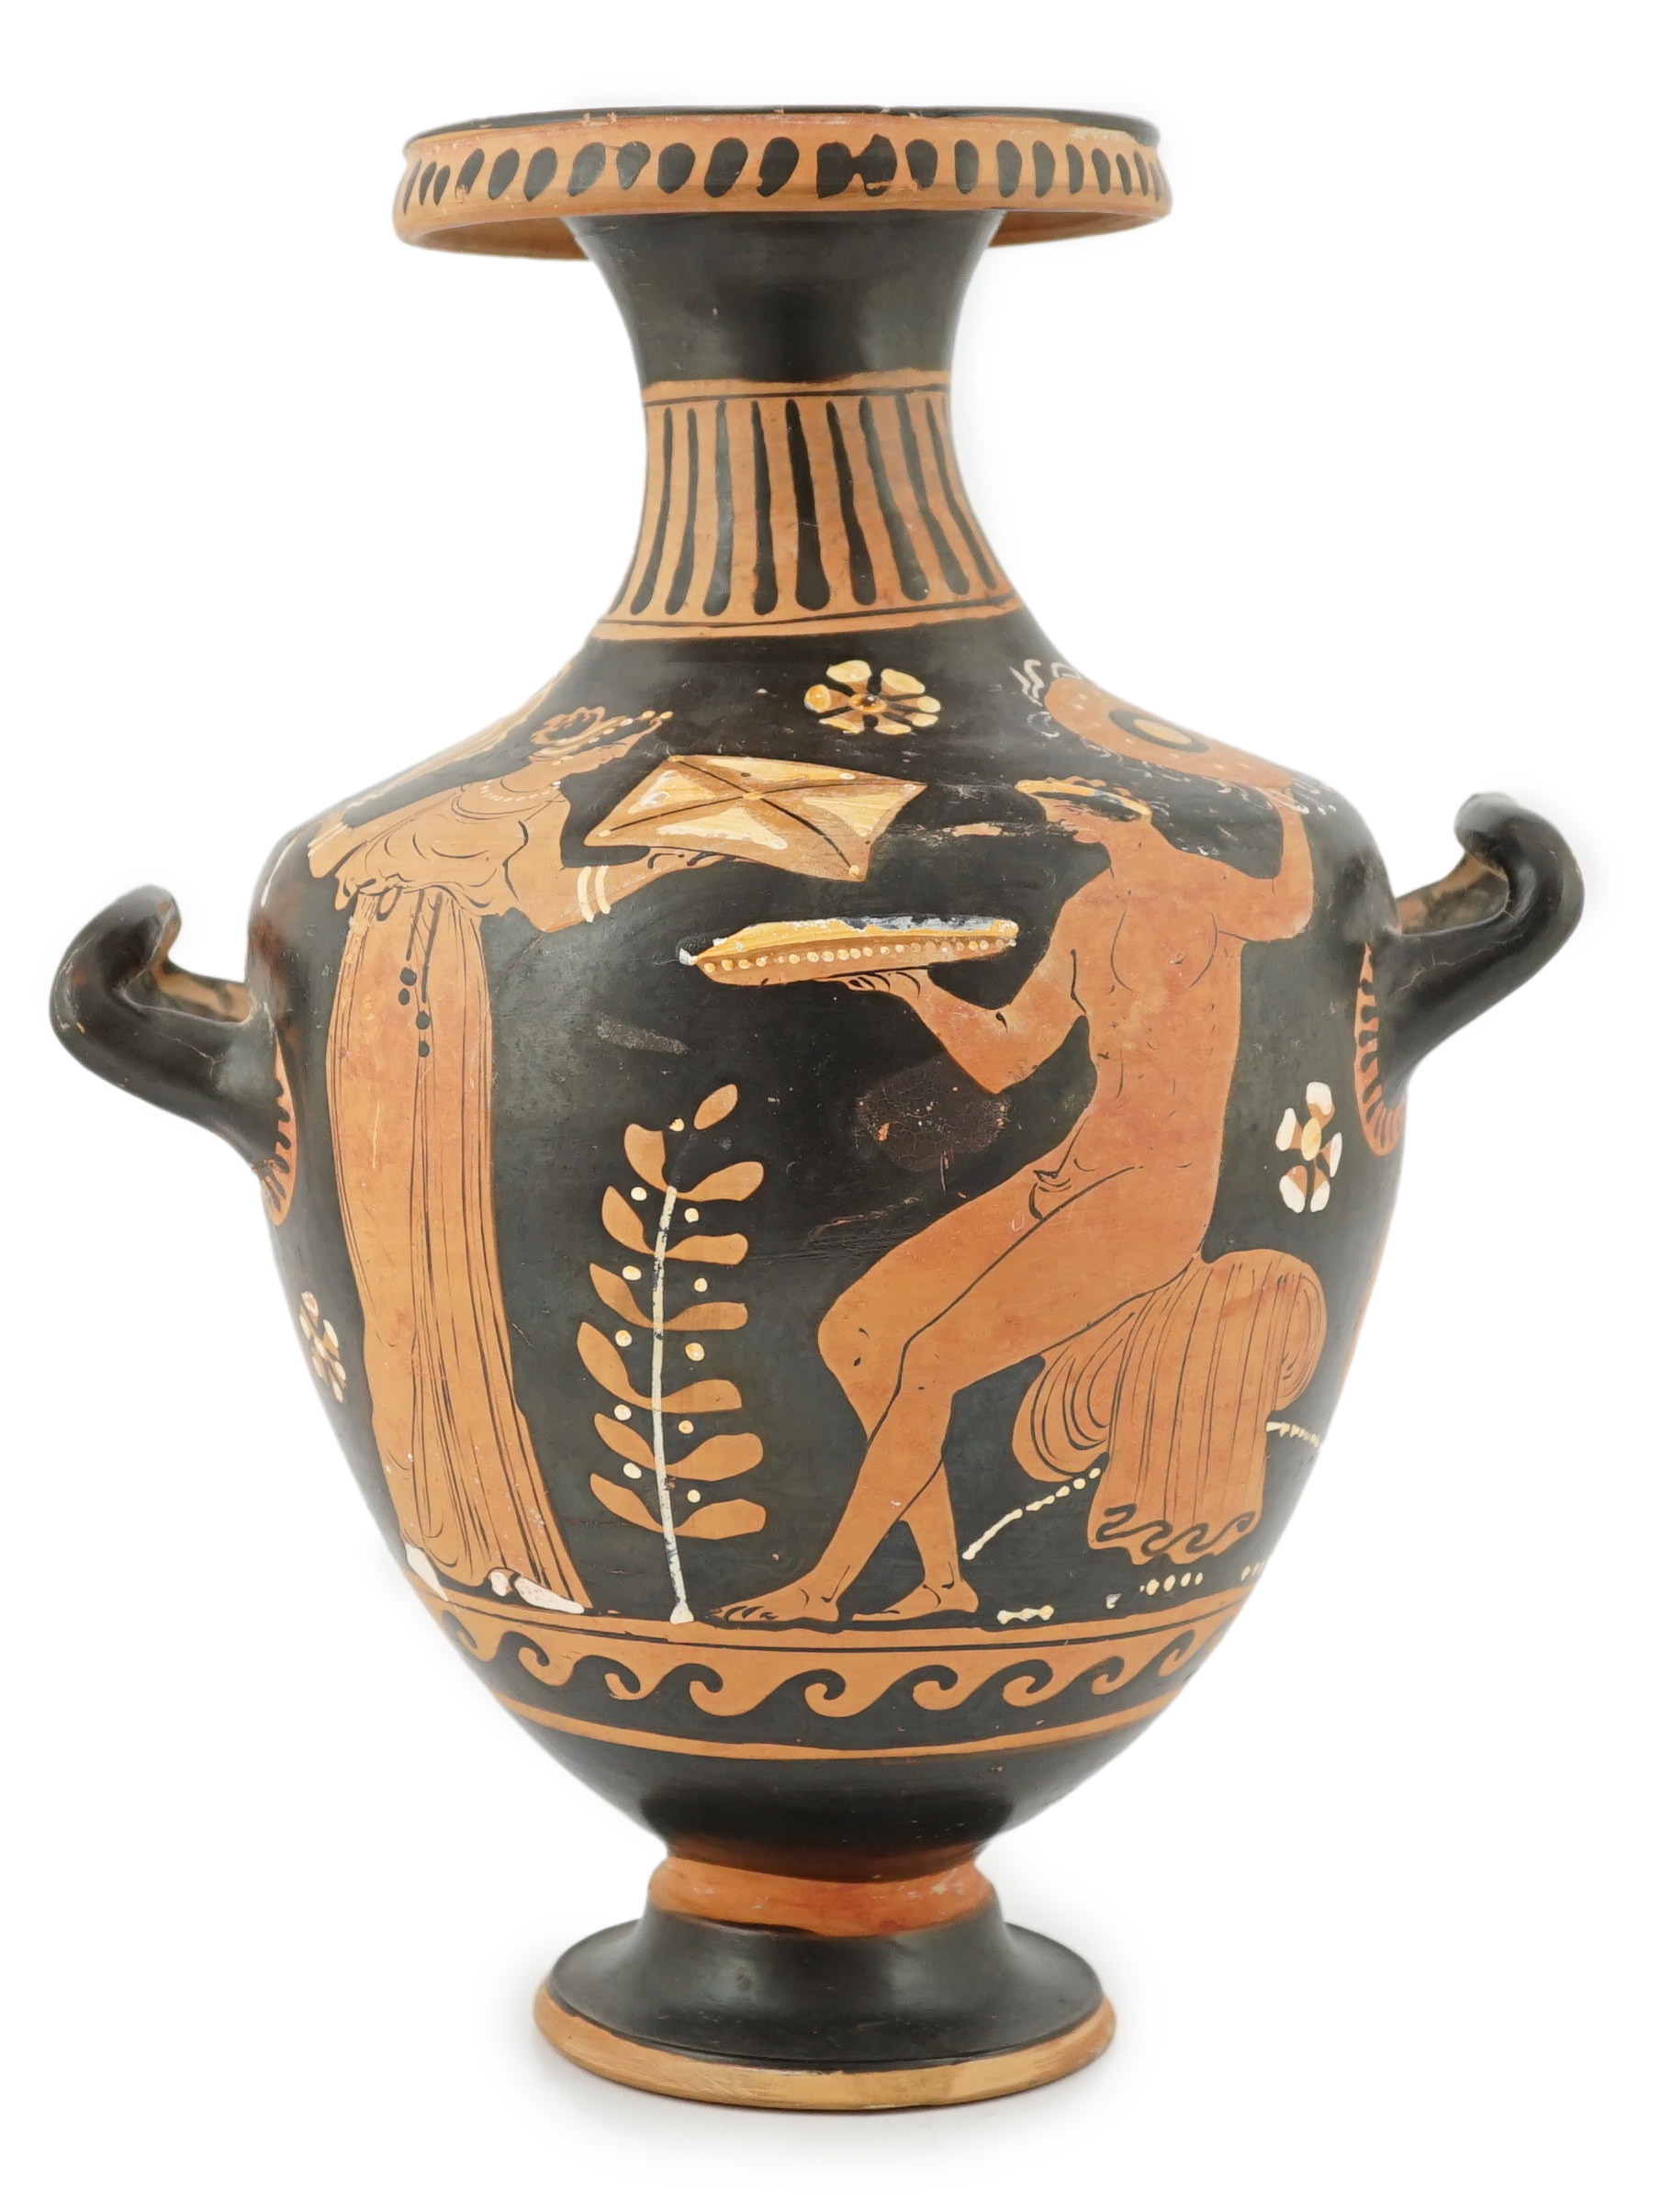 A Greek Apulian Red-Figured Hydria, 4th century BC, manner of the circle of the Darius and Underworld painters, some restoration and cracks                                                                                 